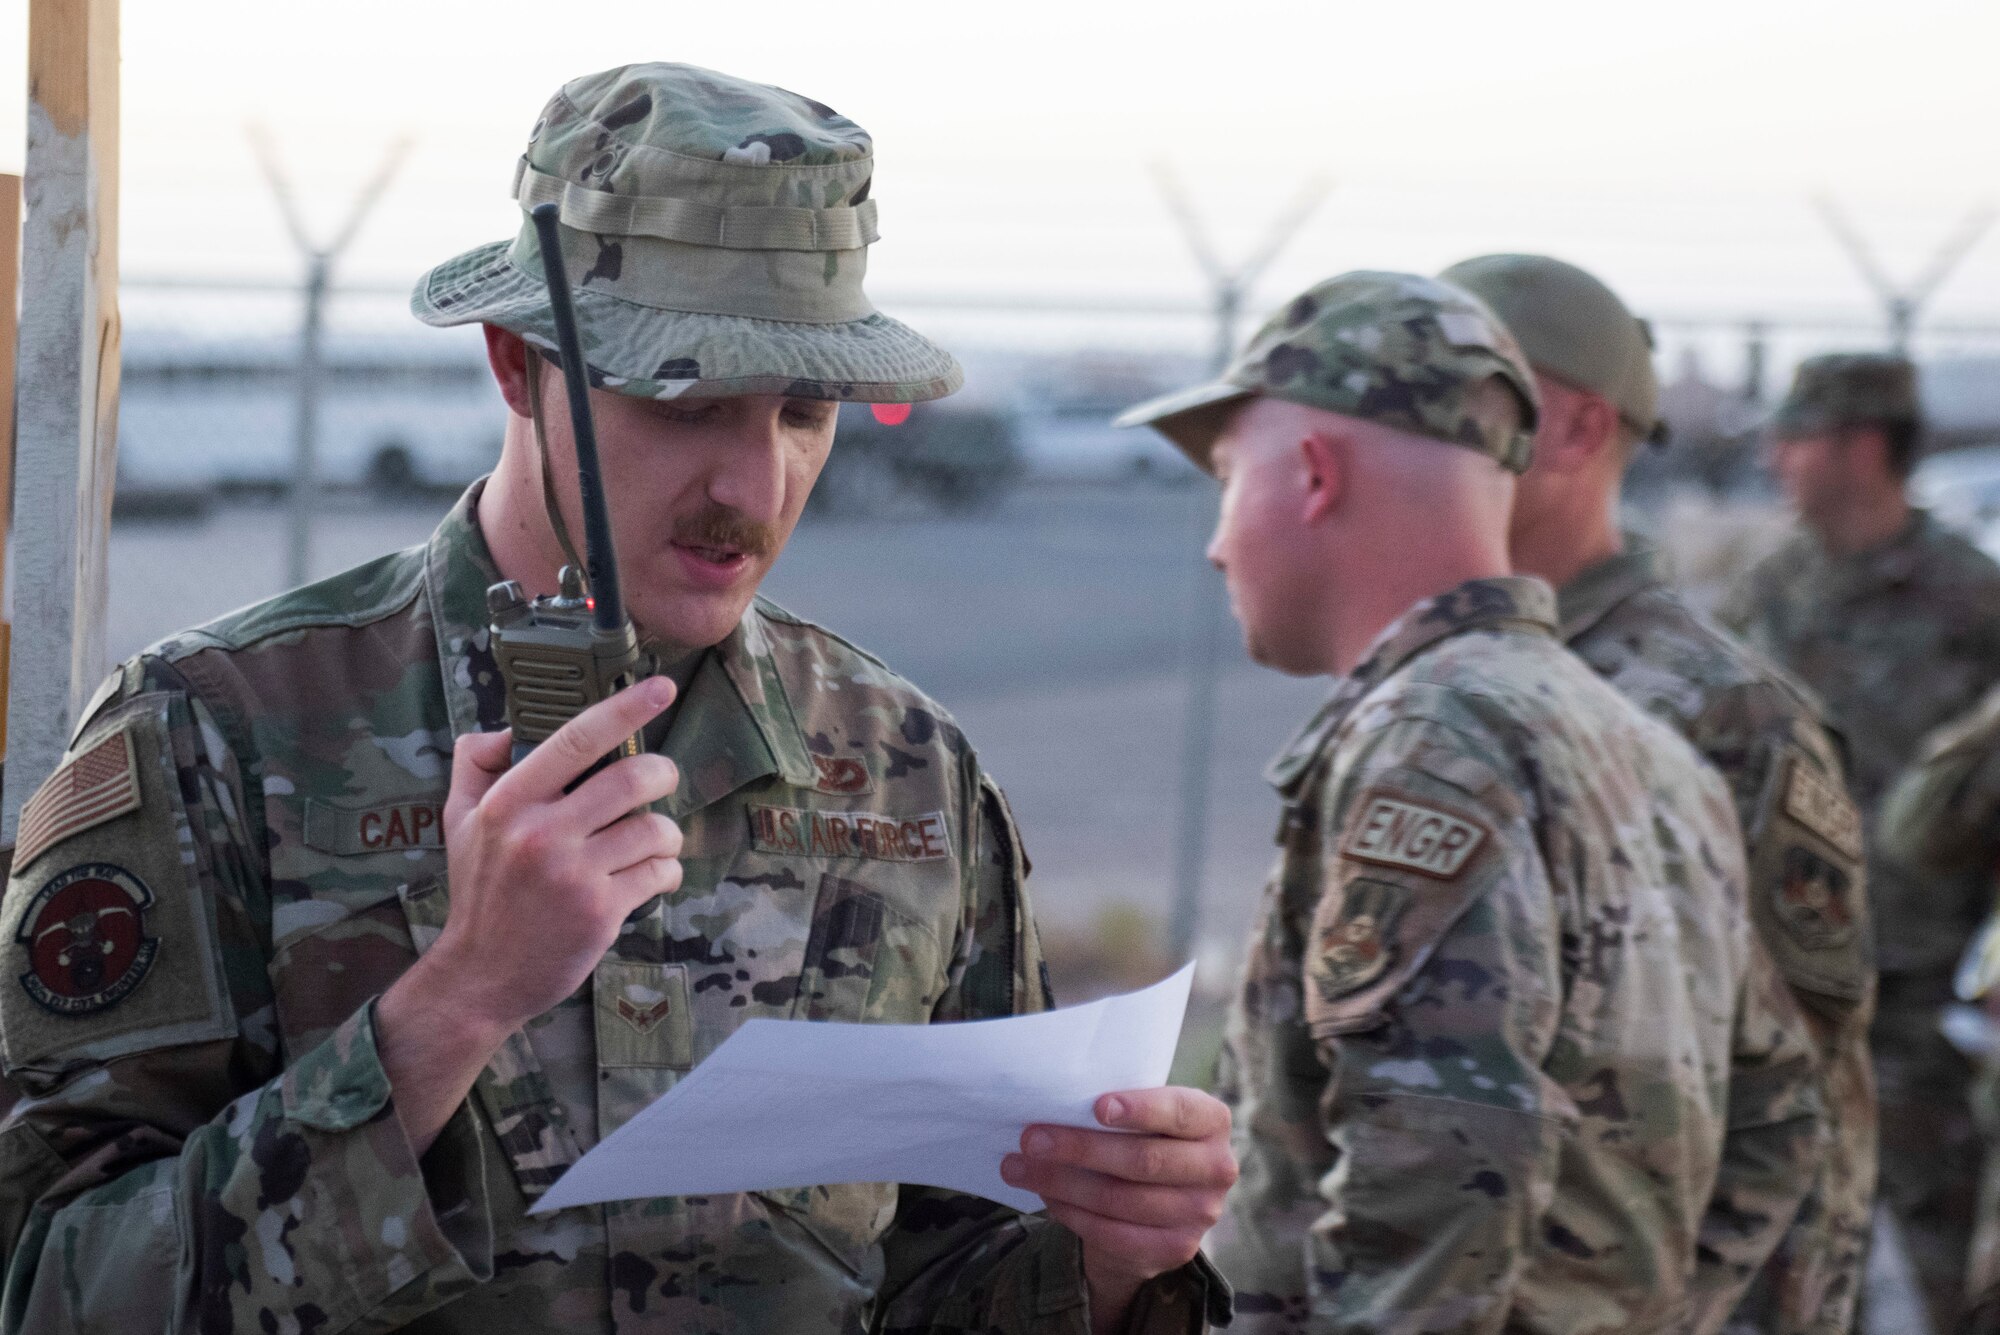 A photo of an Airman speaking into a radio